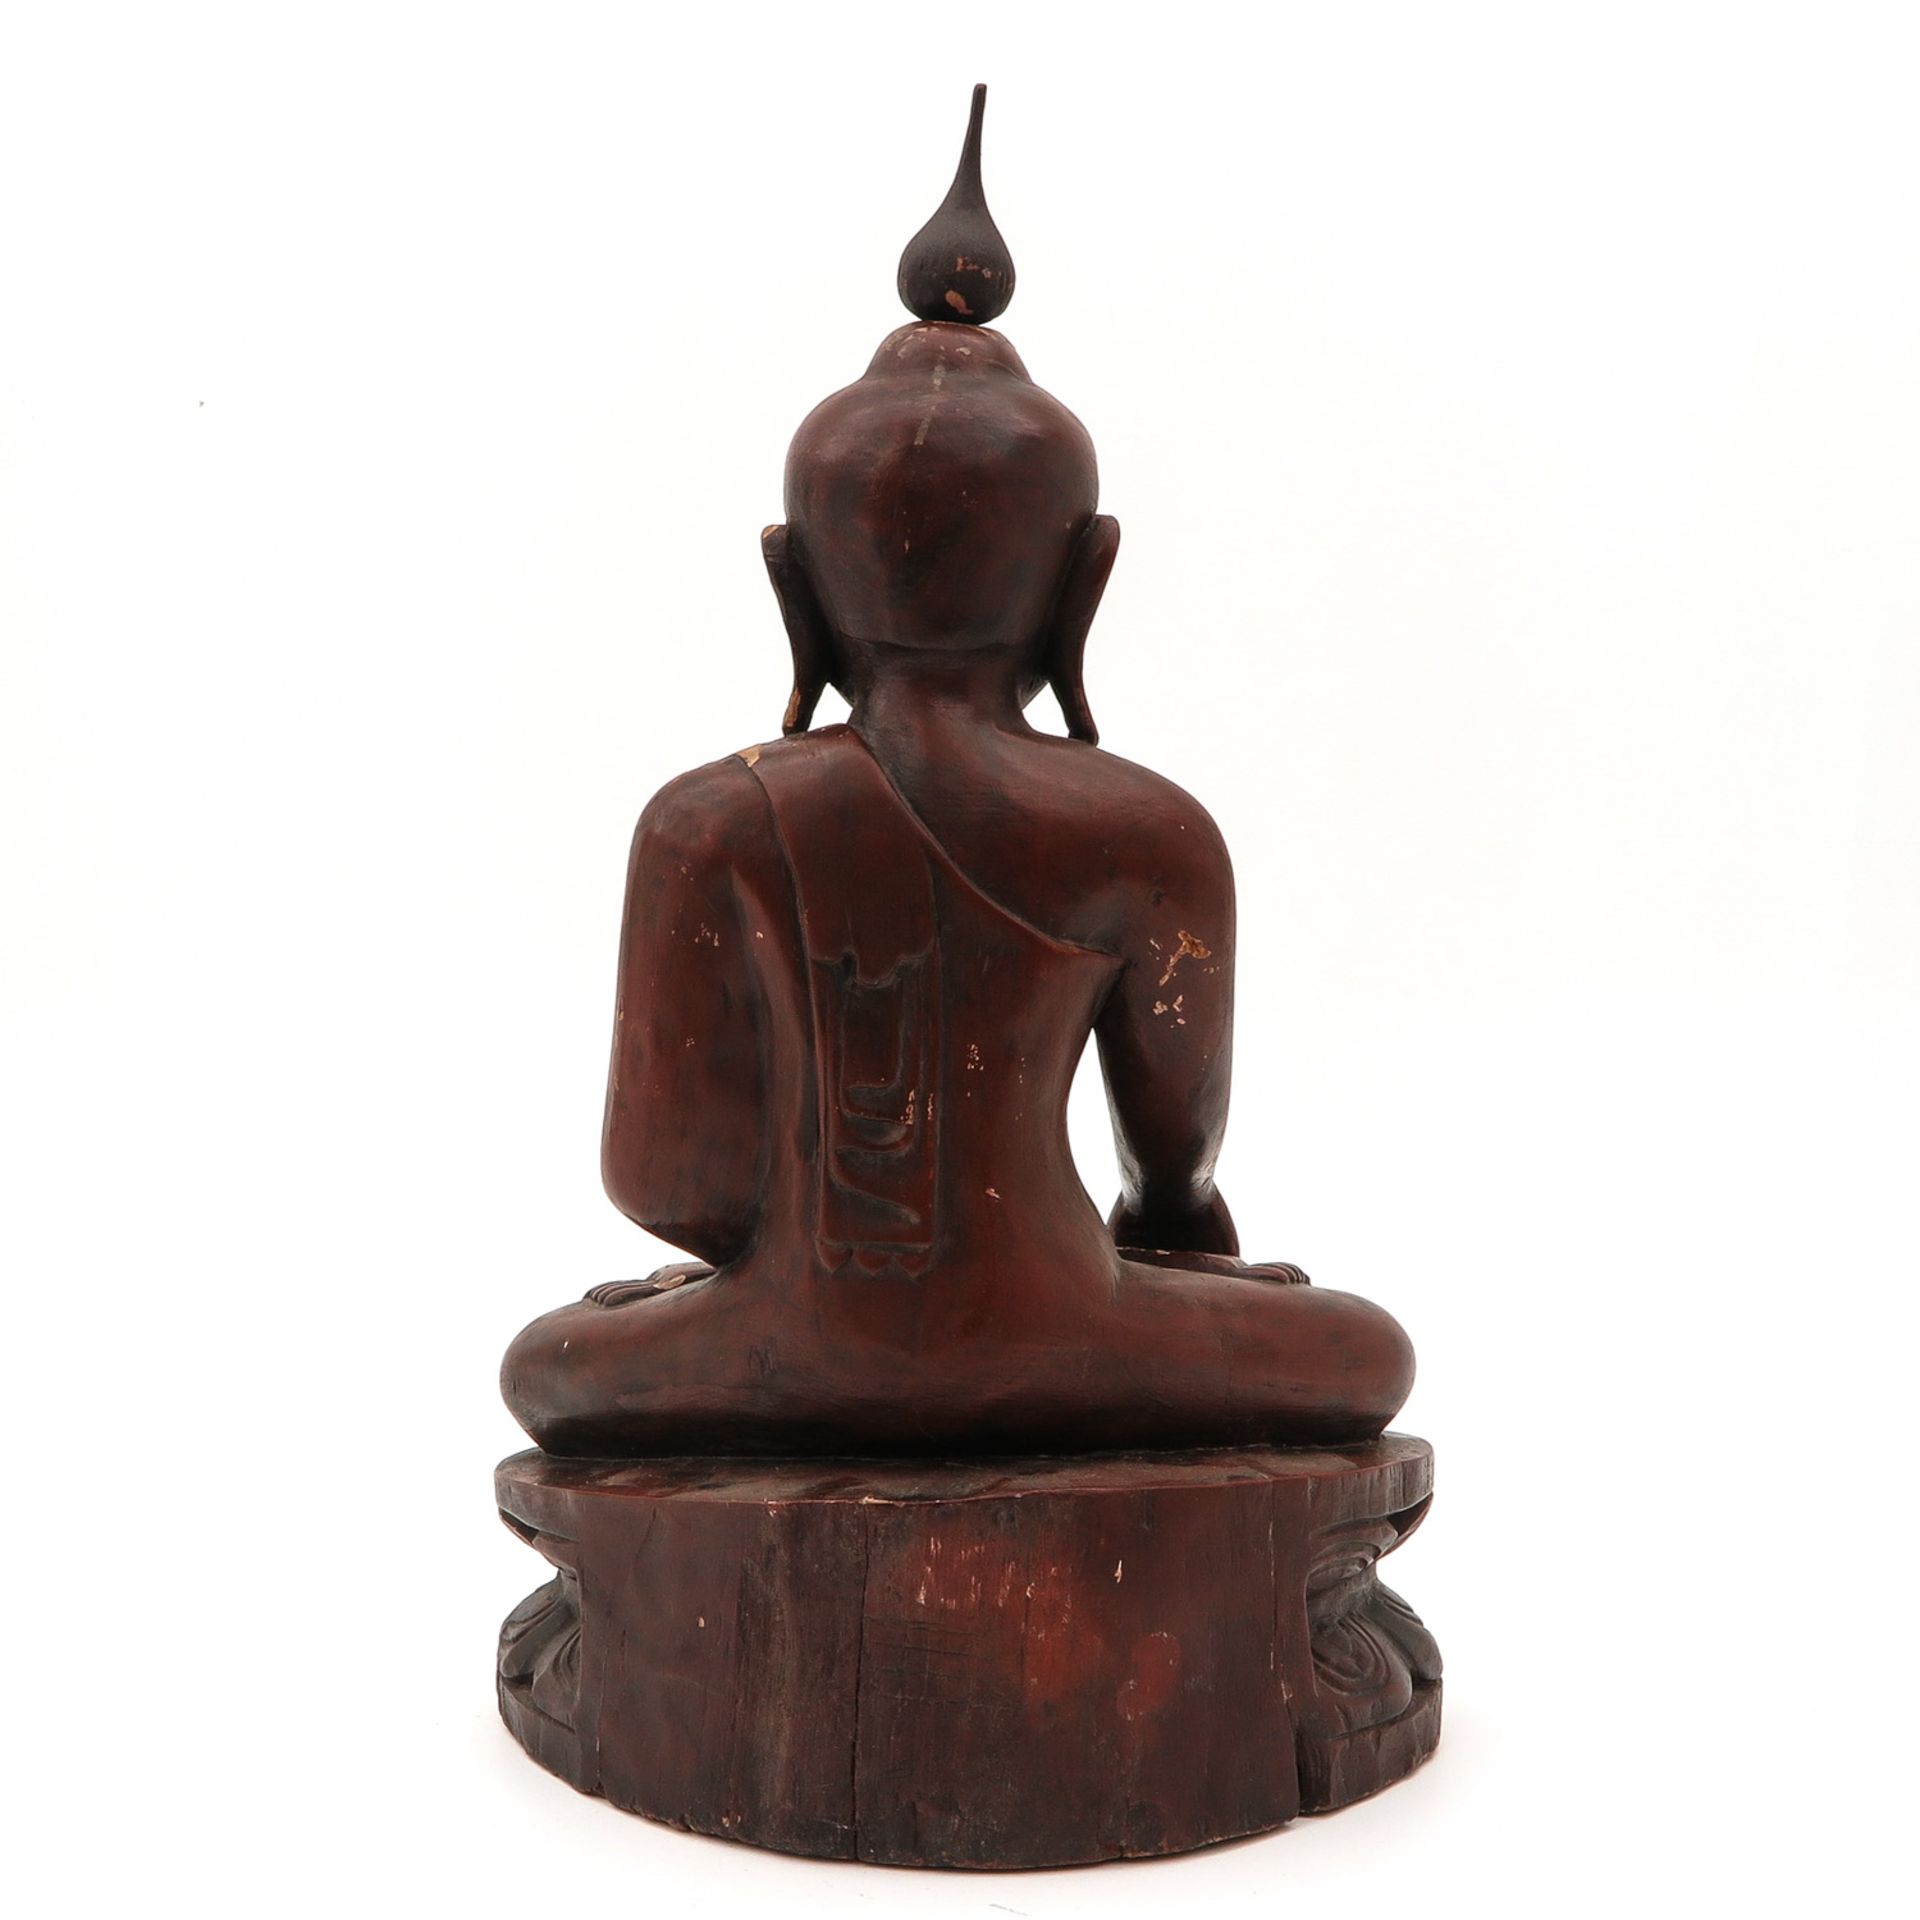 A Carved Wood Buddha Sculpture - Image 3 of 10